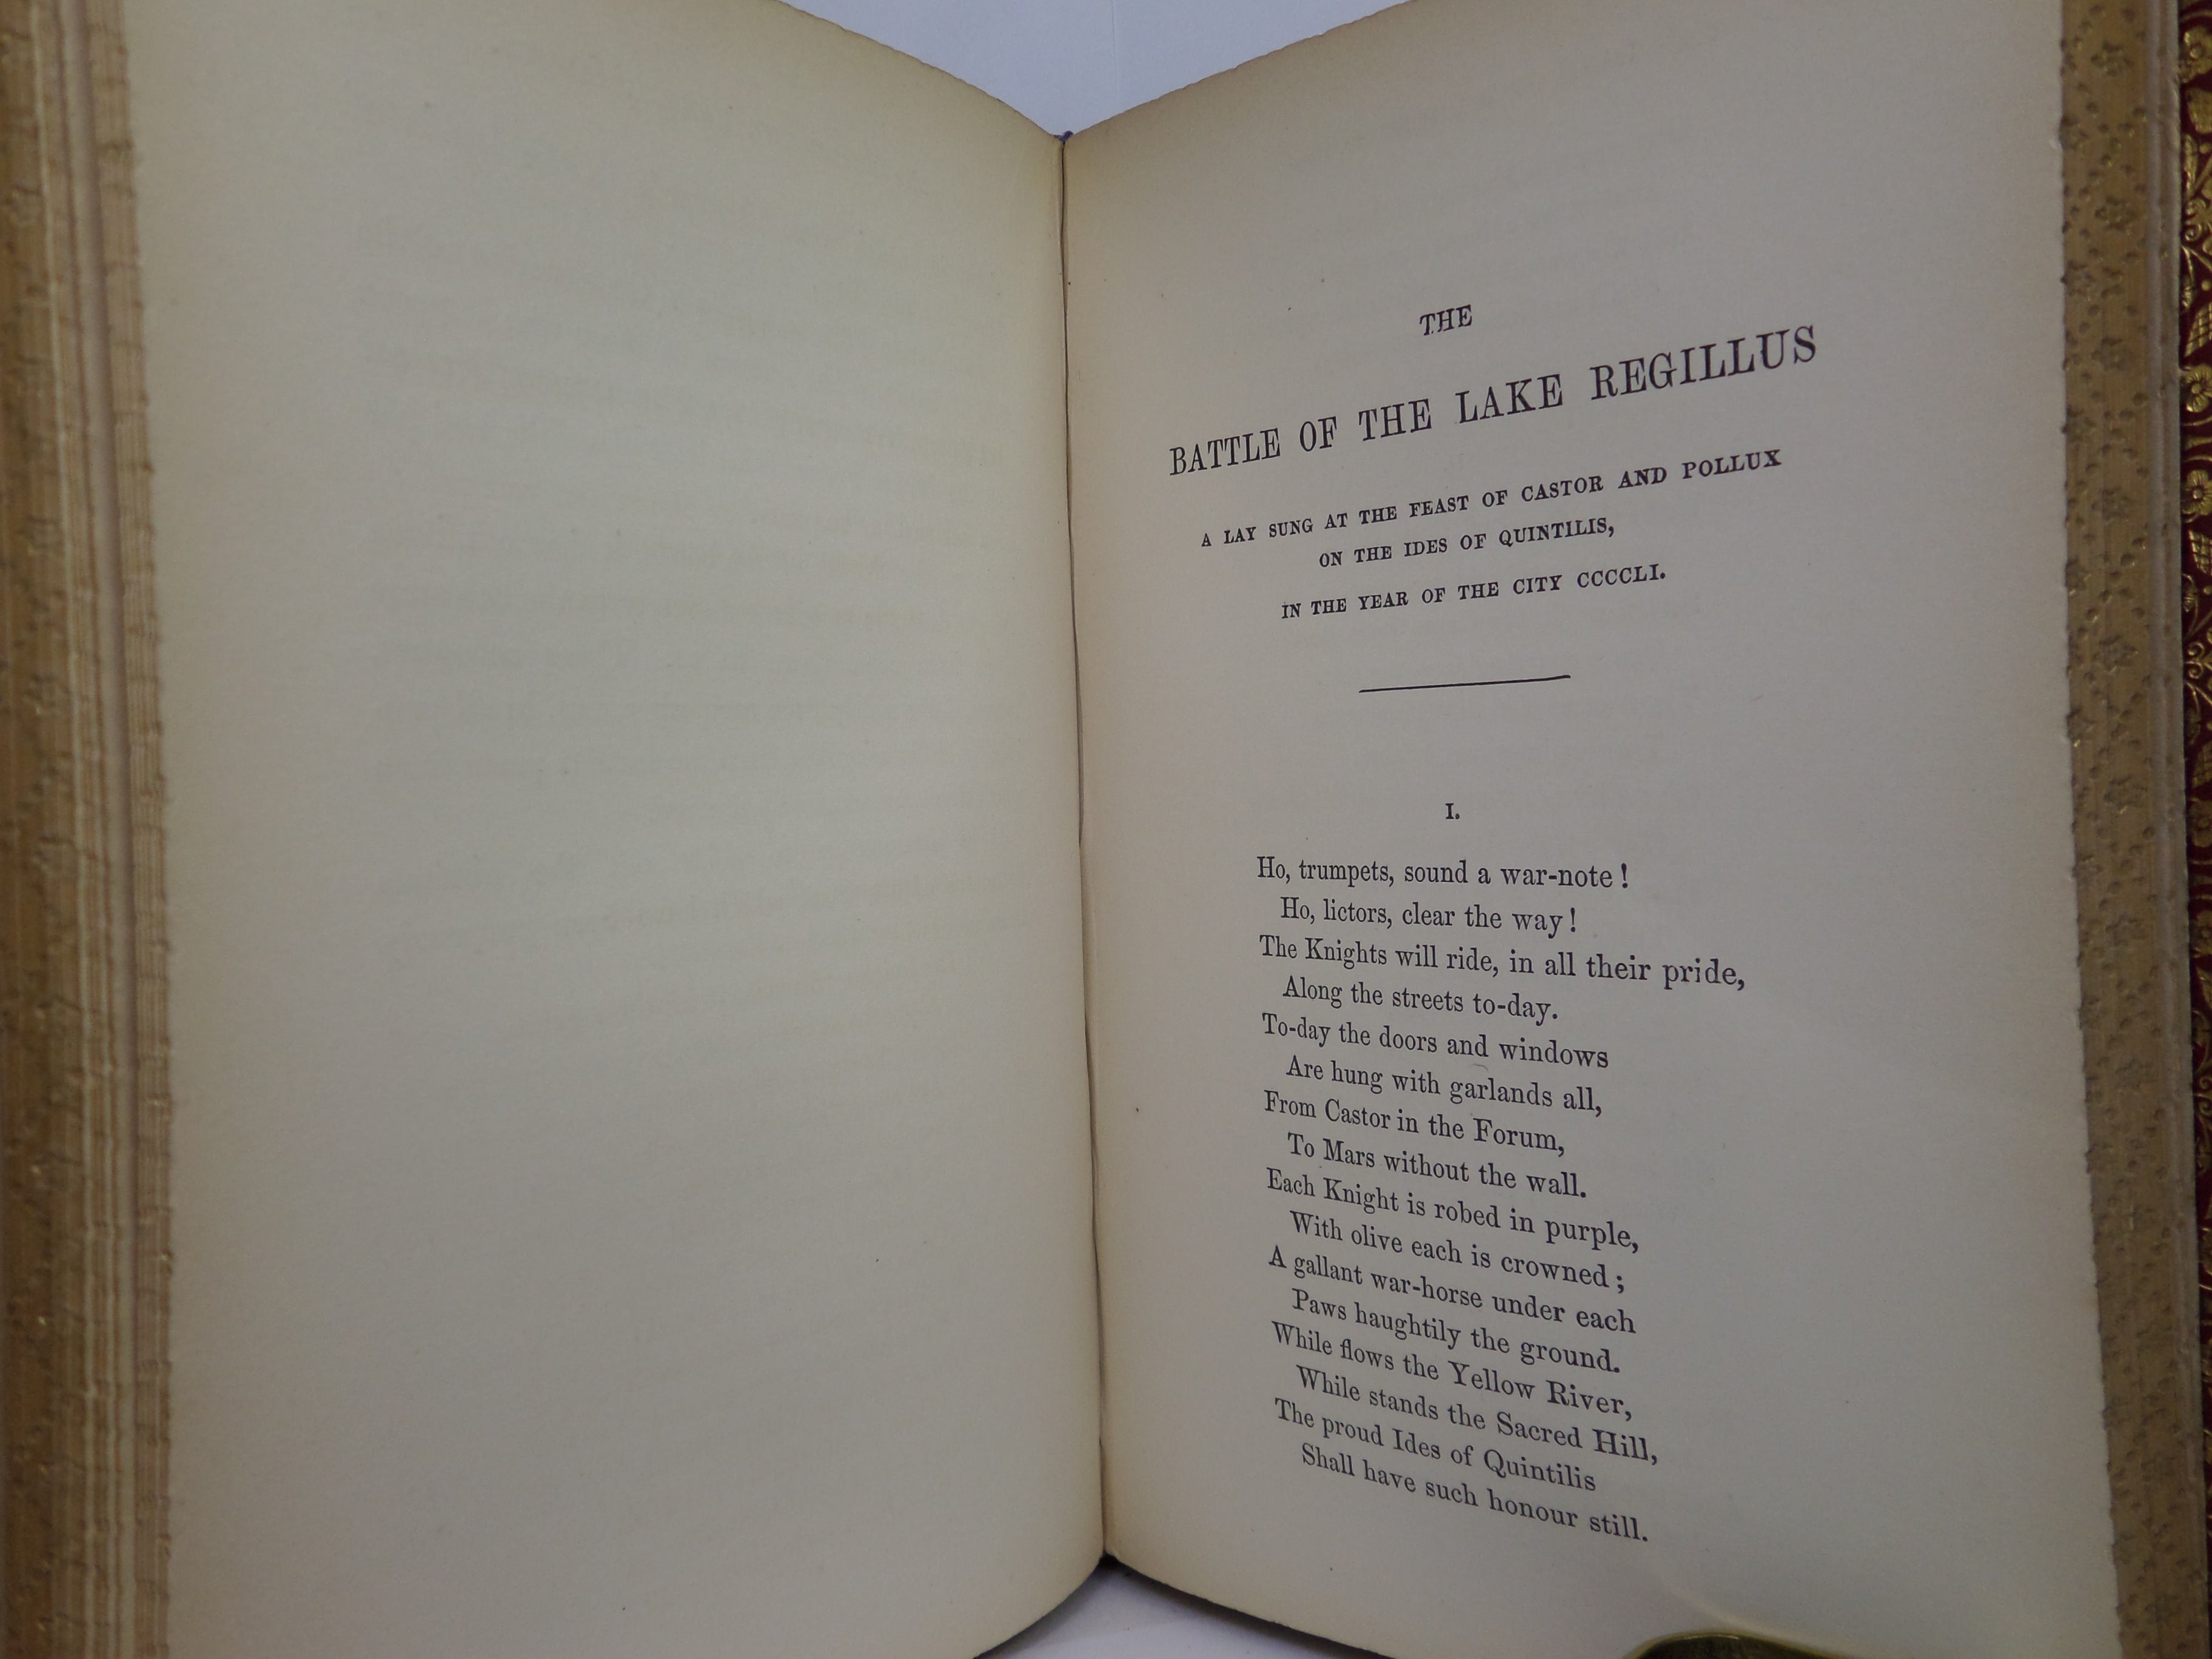 LAYS OF ANCIENT ROME: WITH IVRY, AND THE ARMADA BY THOMAS BABINGTON MACAULAY 1856 FINE LEATHER BINDING